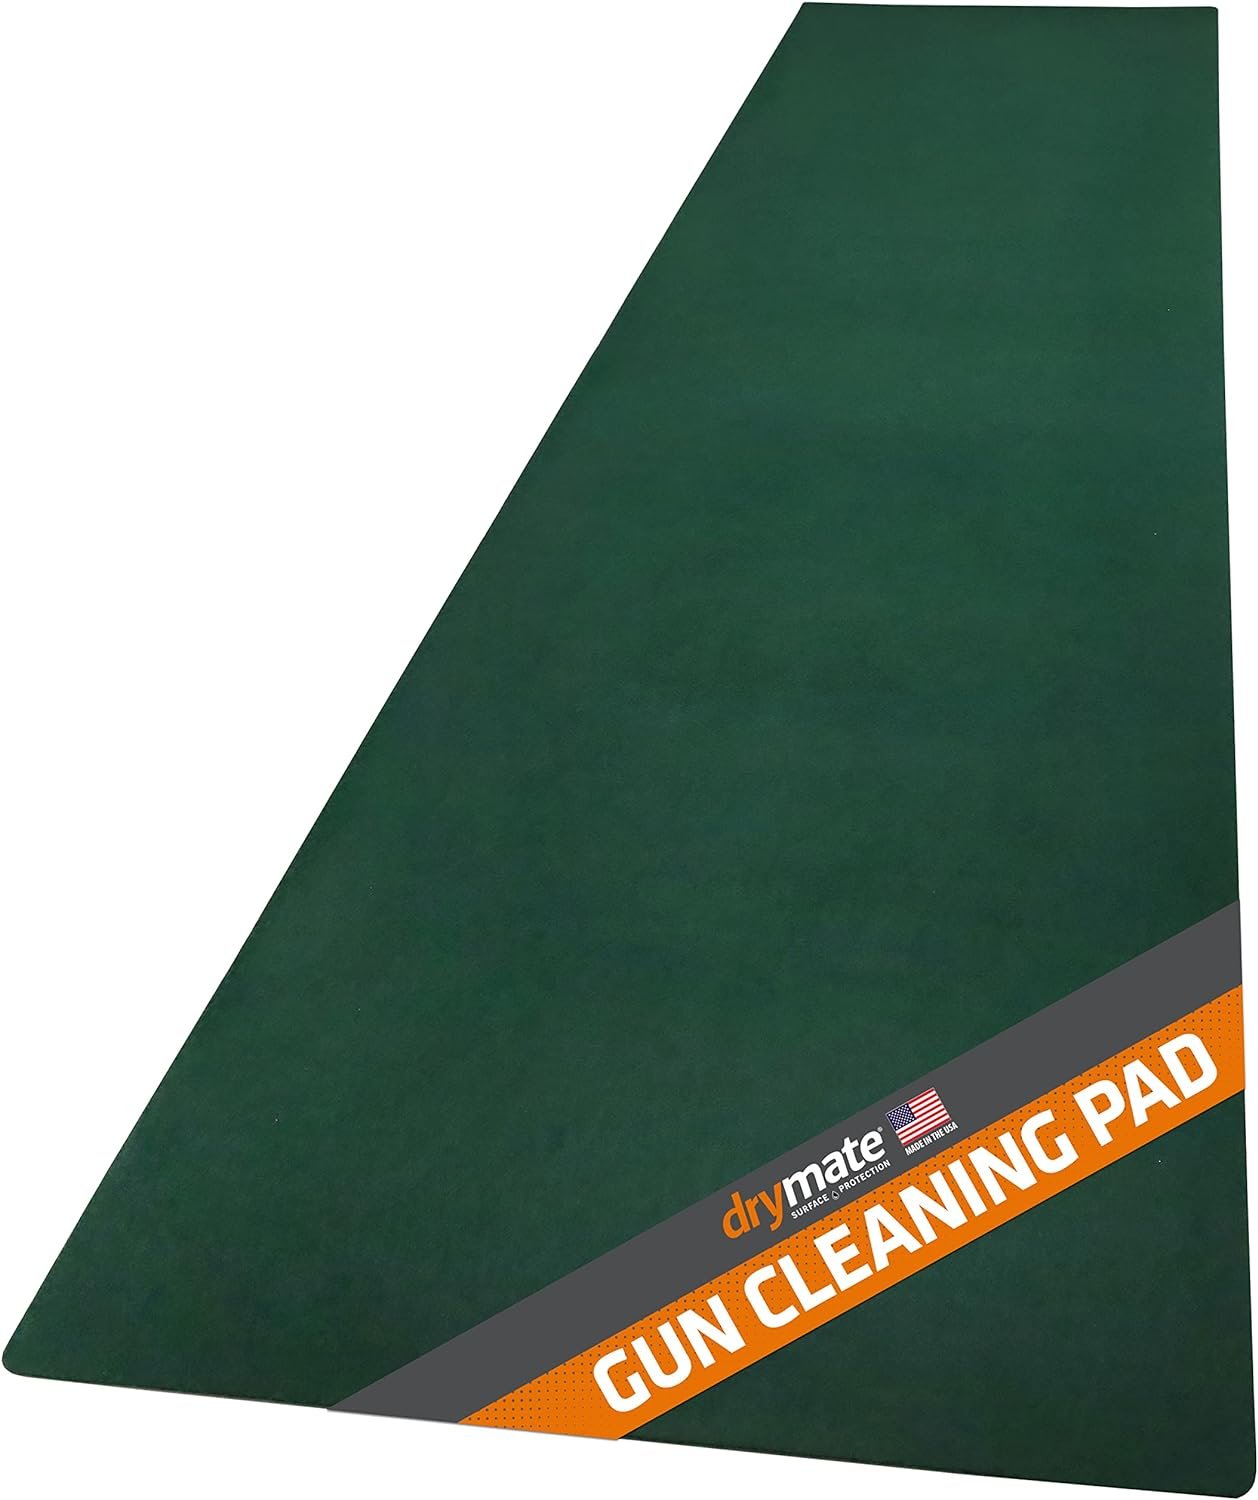 Drymate Gun Cleaning Pad Review